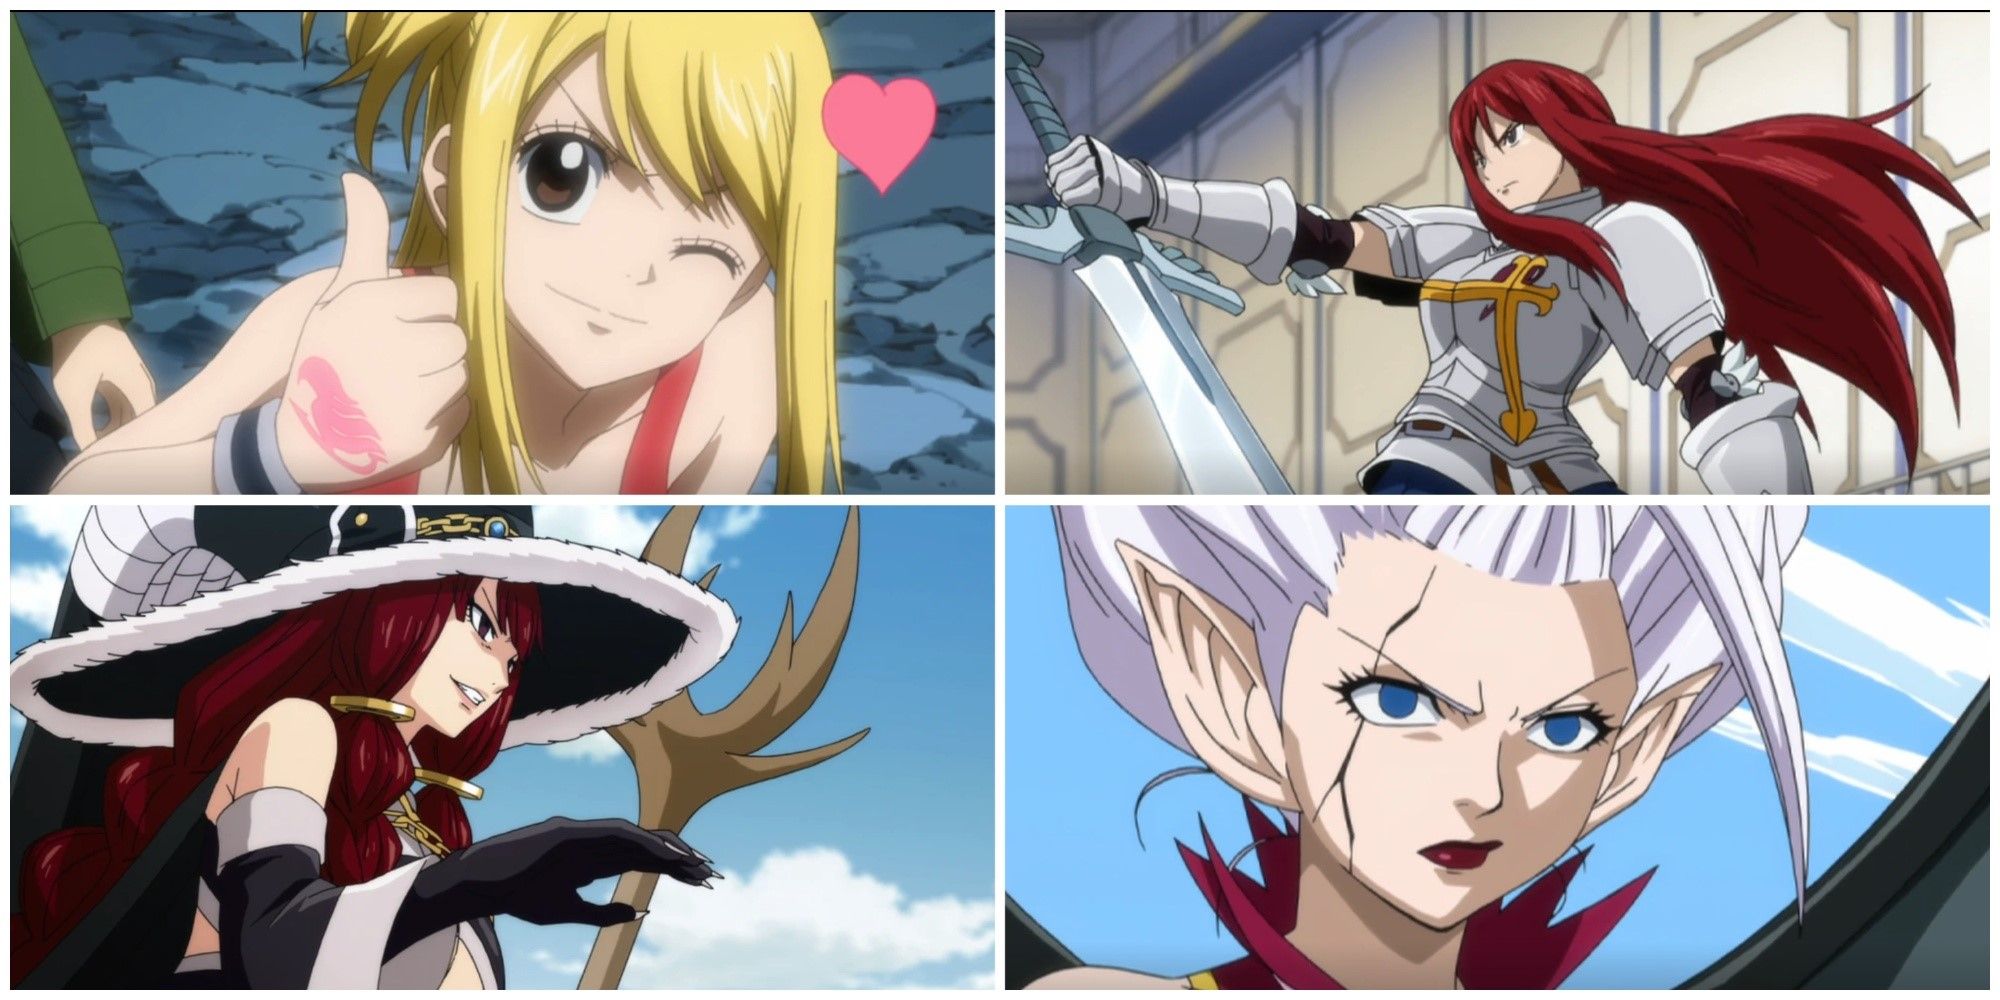 What Female Fairy Tail Character are you?